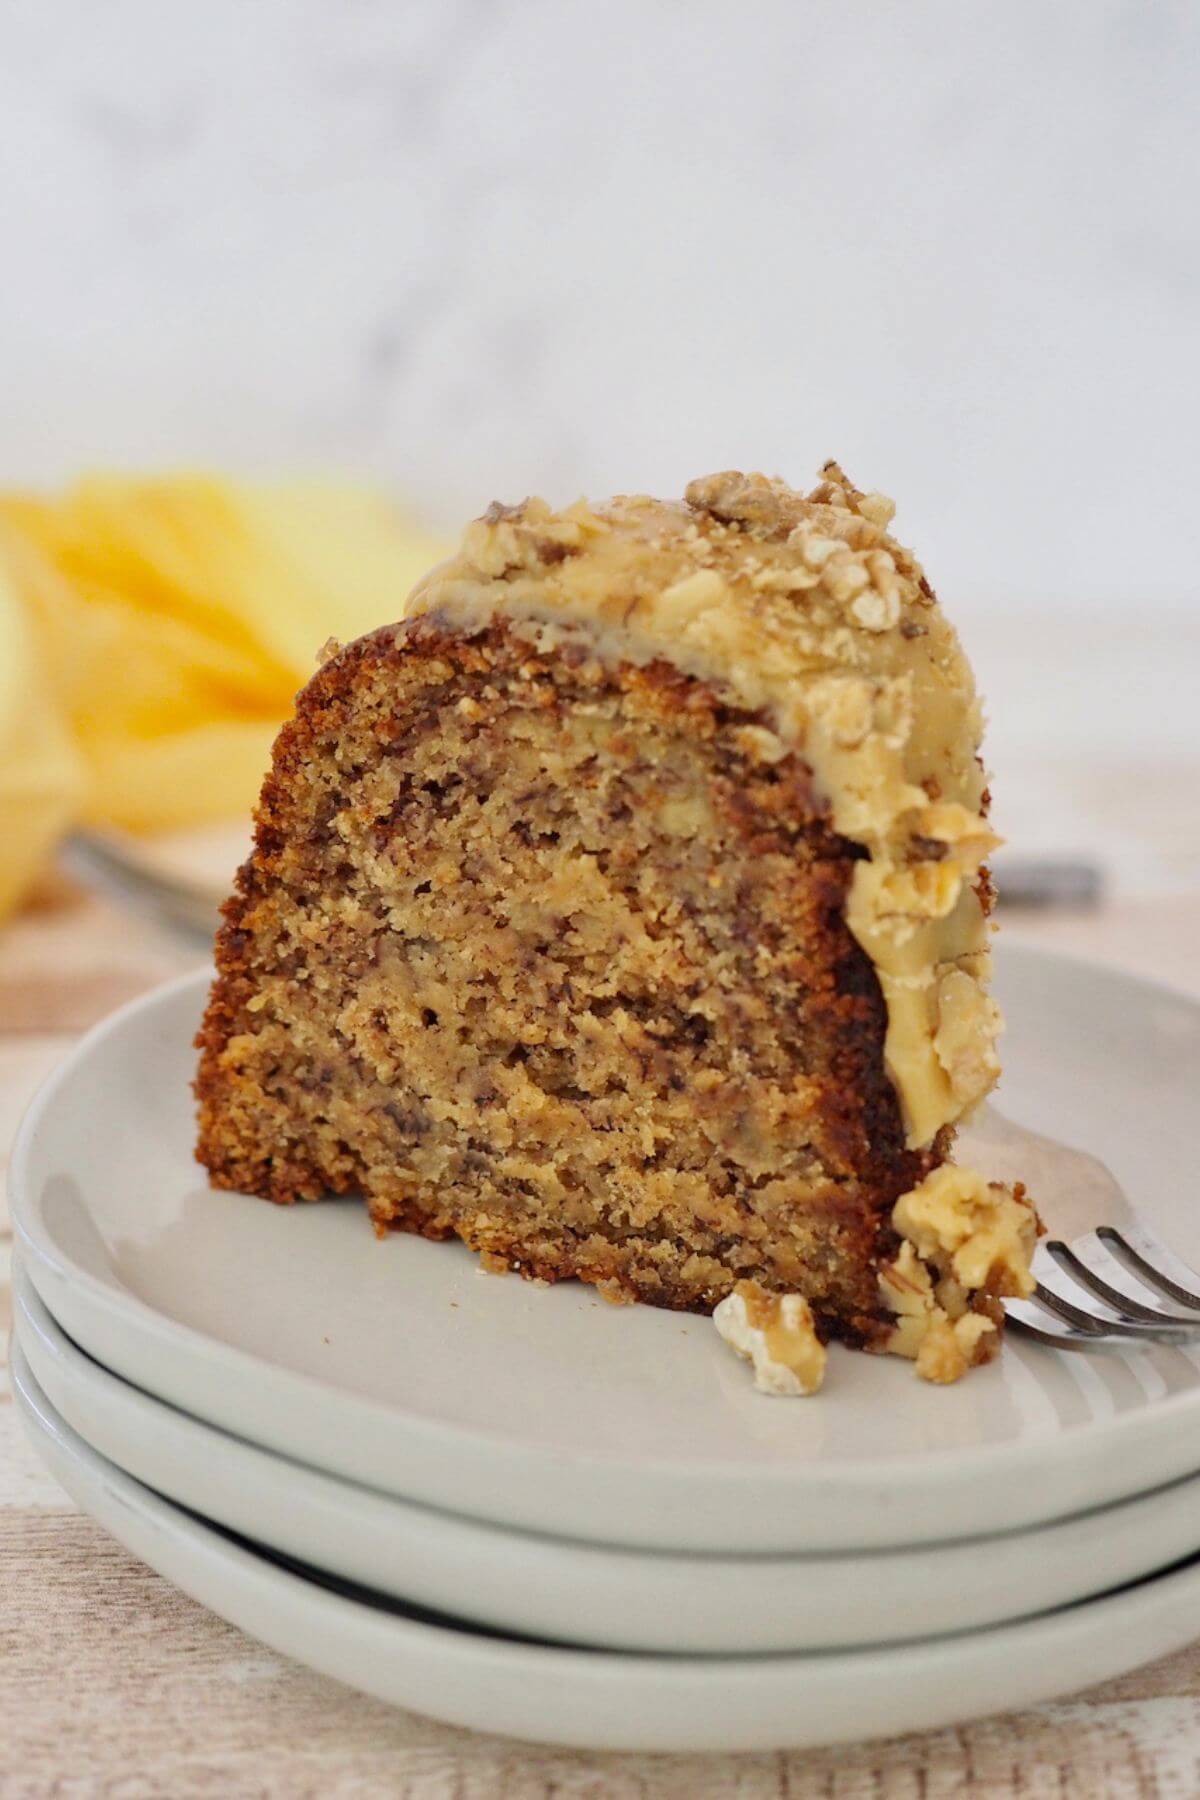 Slice of best Banana Bread Bundt Cake with sauce and walnuts on plate.